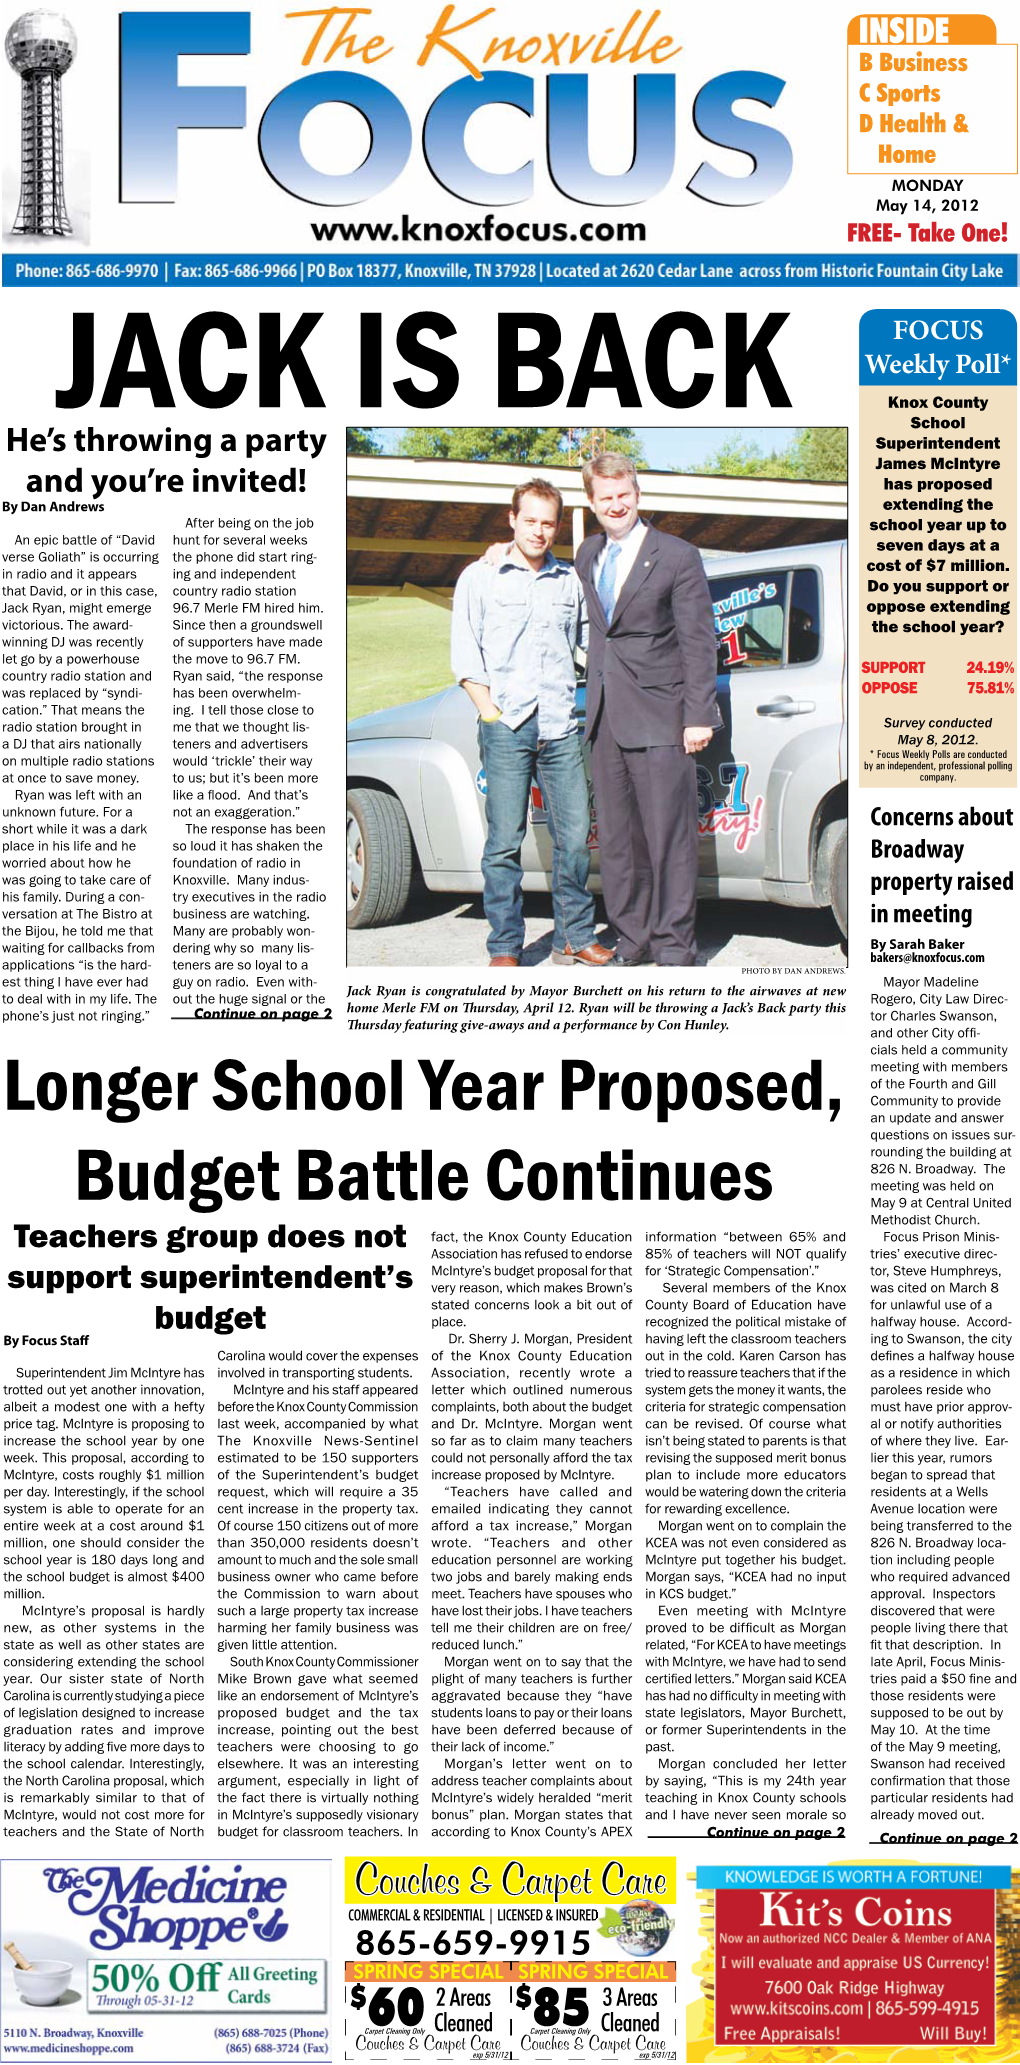 Longer School Year Proposed, Budget Battle Continues